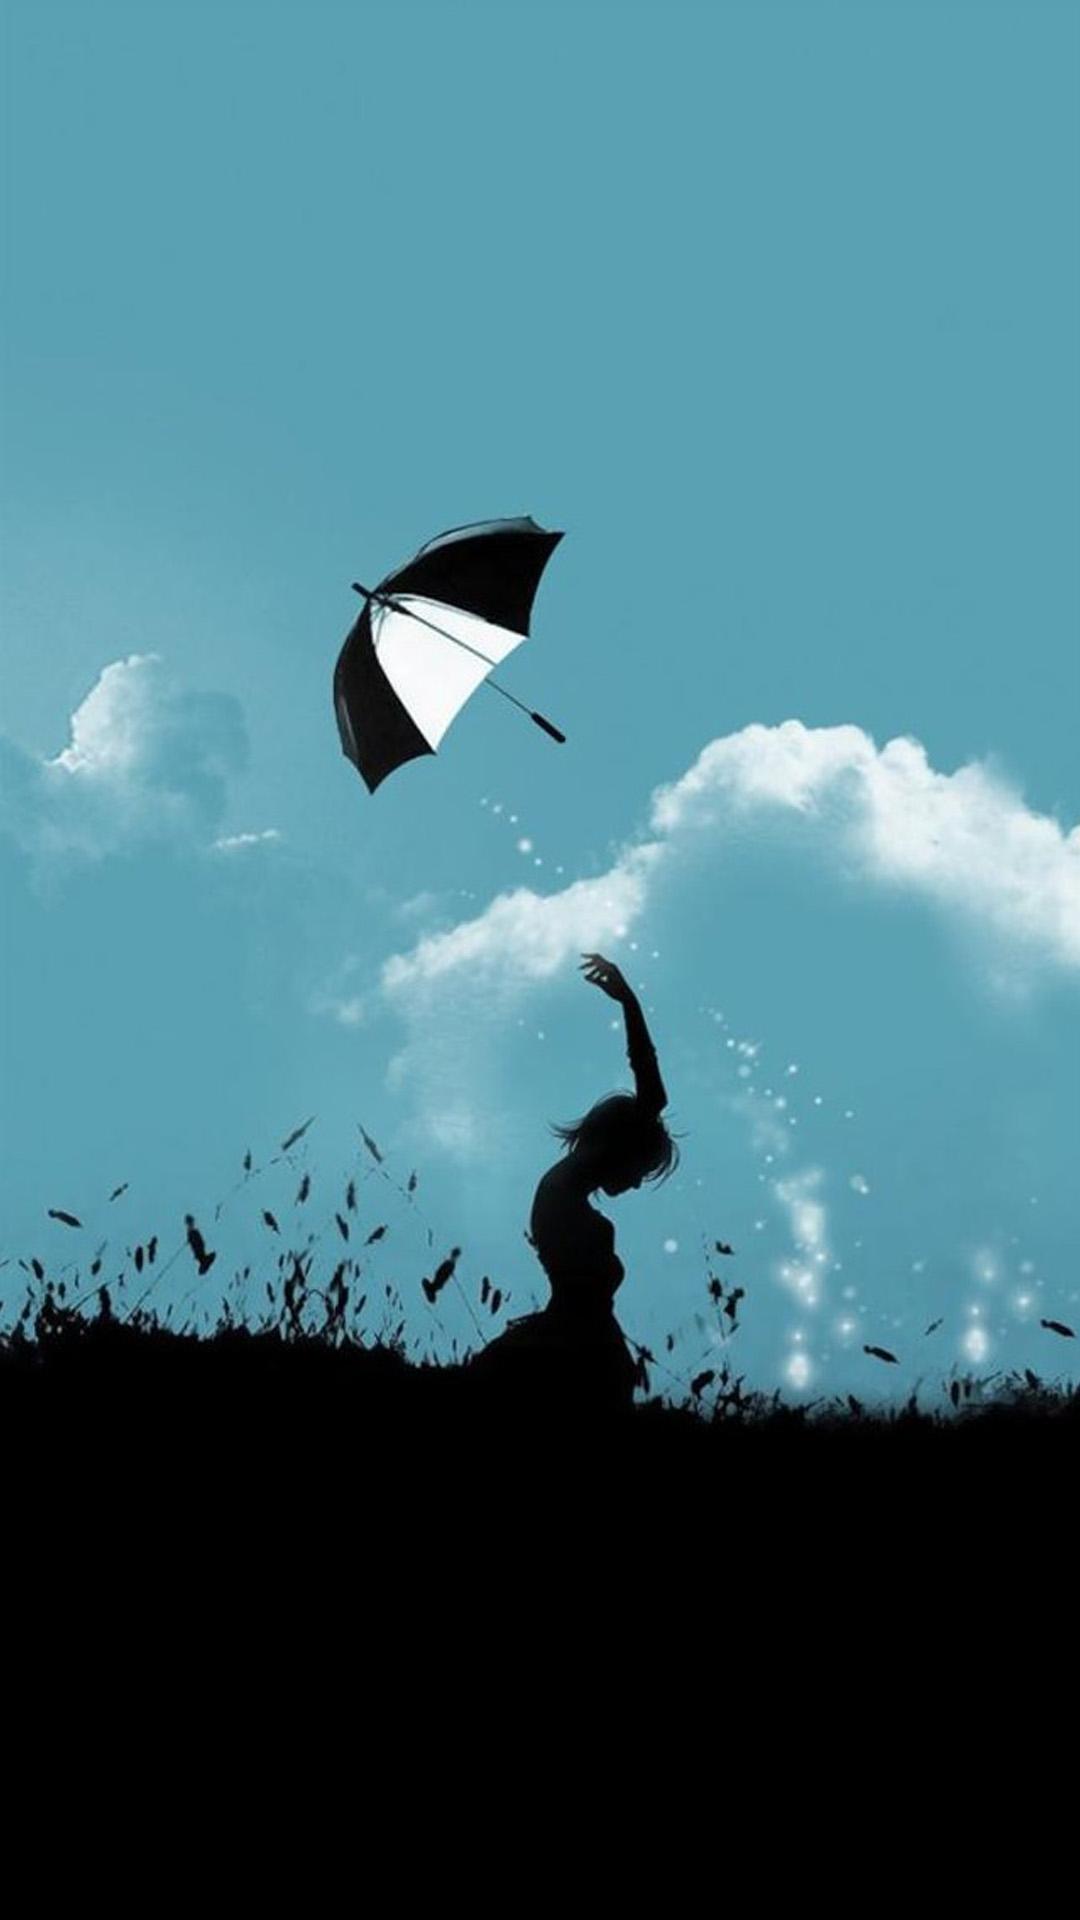 Hill Umbrella Throw At Cloudy Sky Aesthetic Art iPhone 8 Wallpapers Free Download